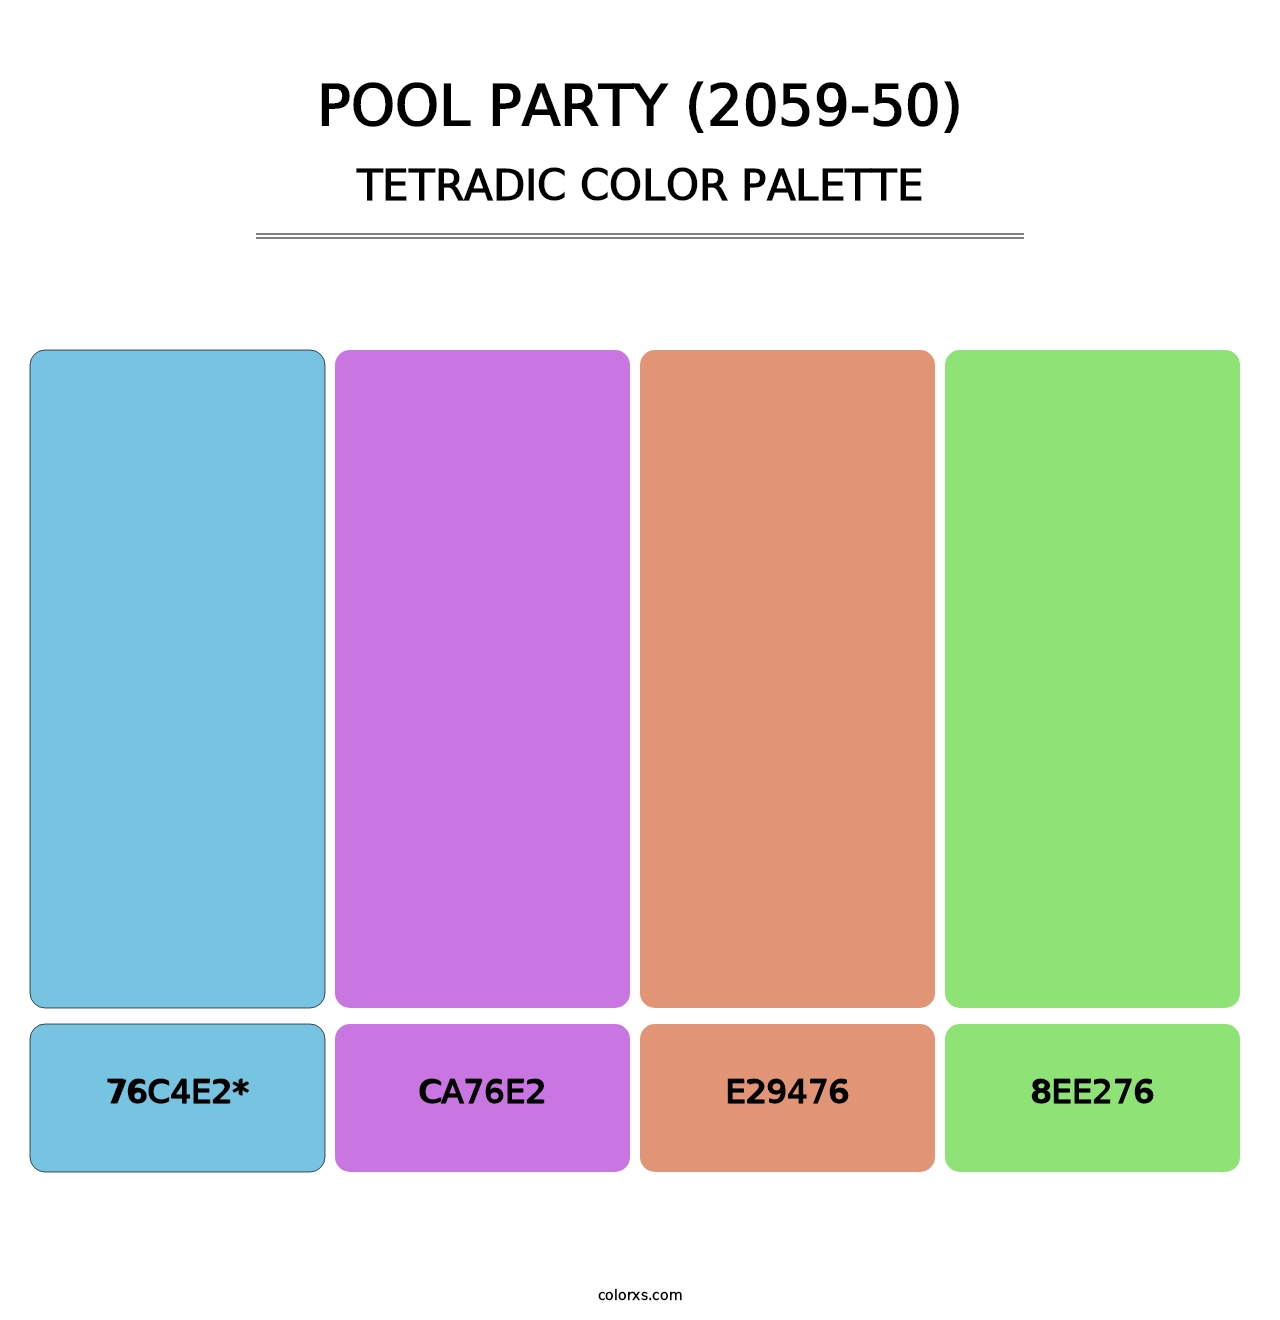 Pool Party (2059-50) - Tetradic Color Palette